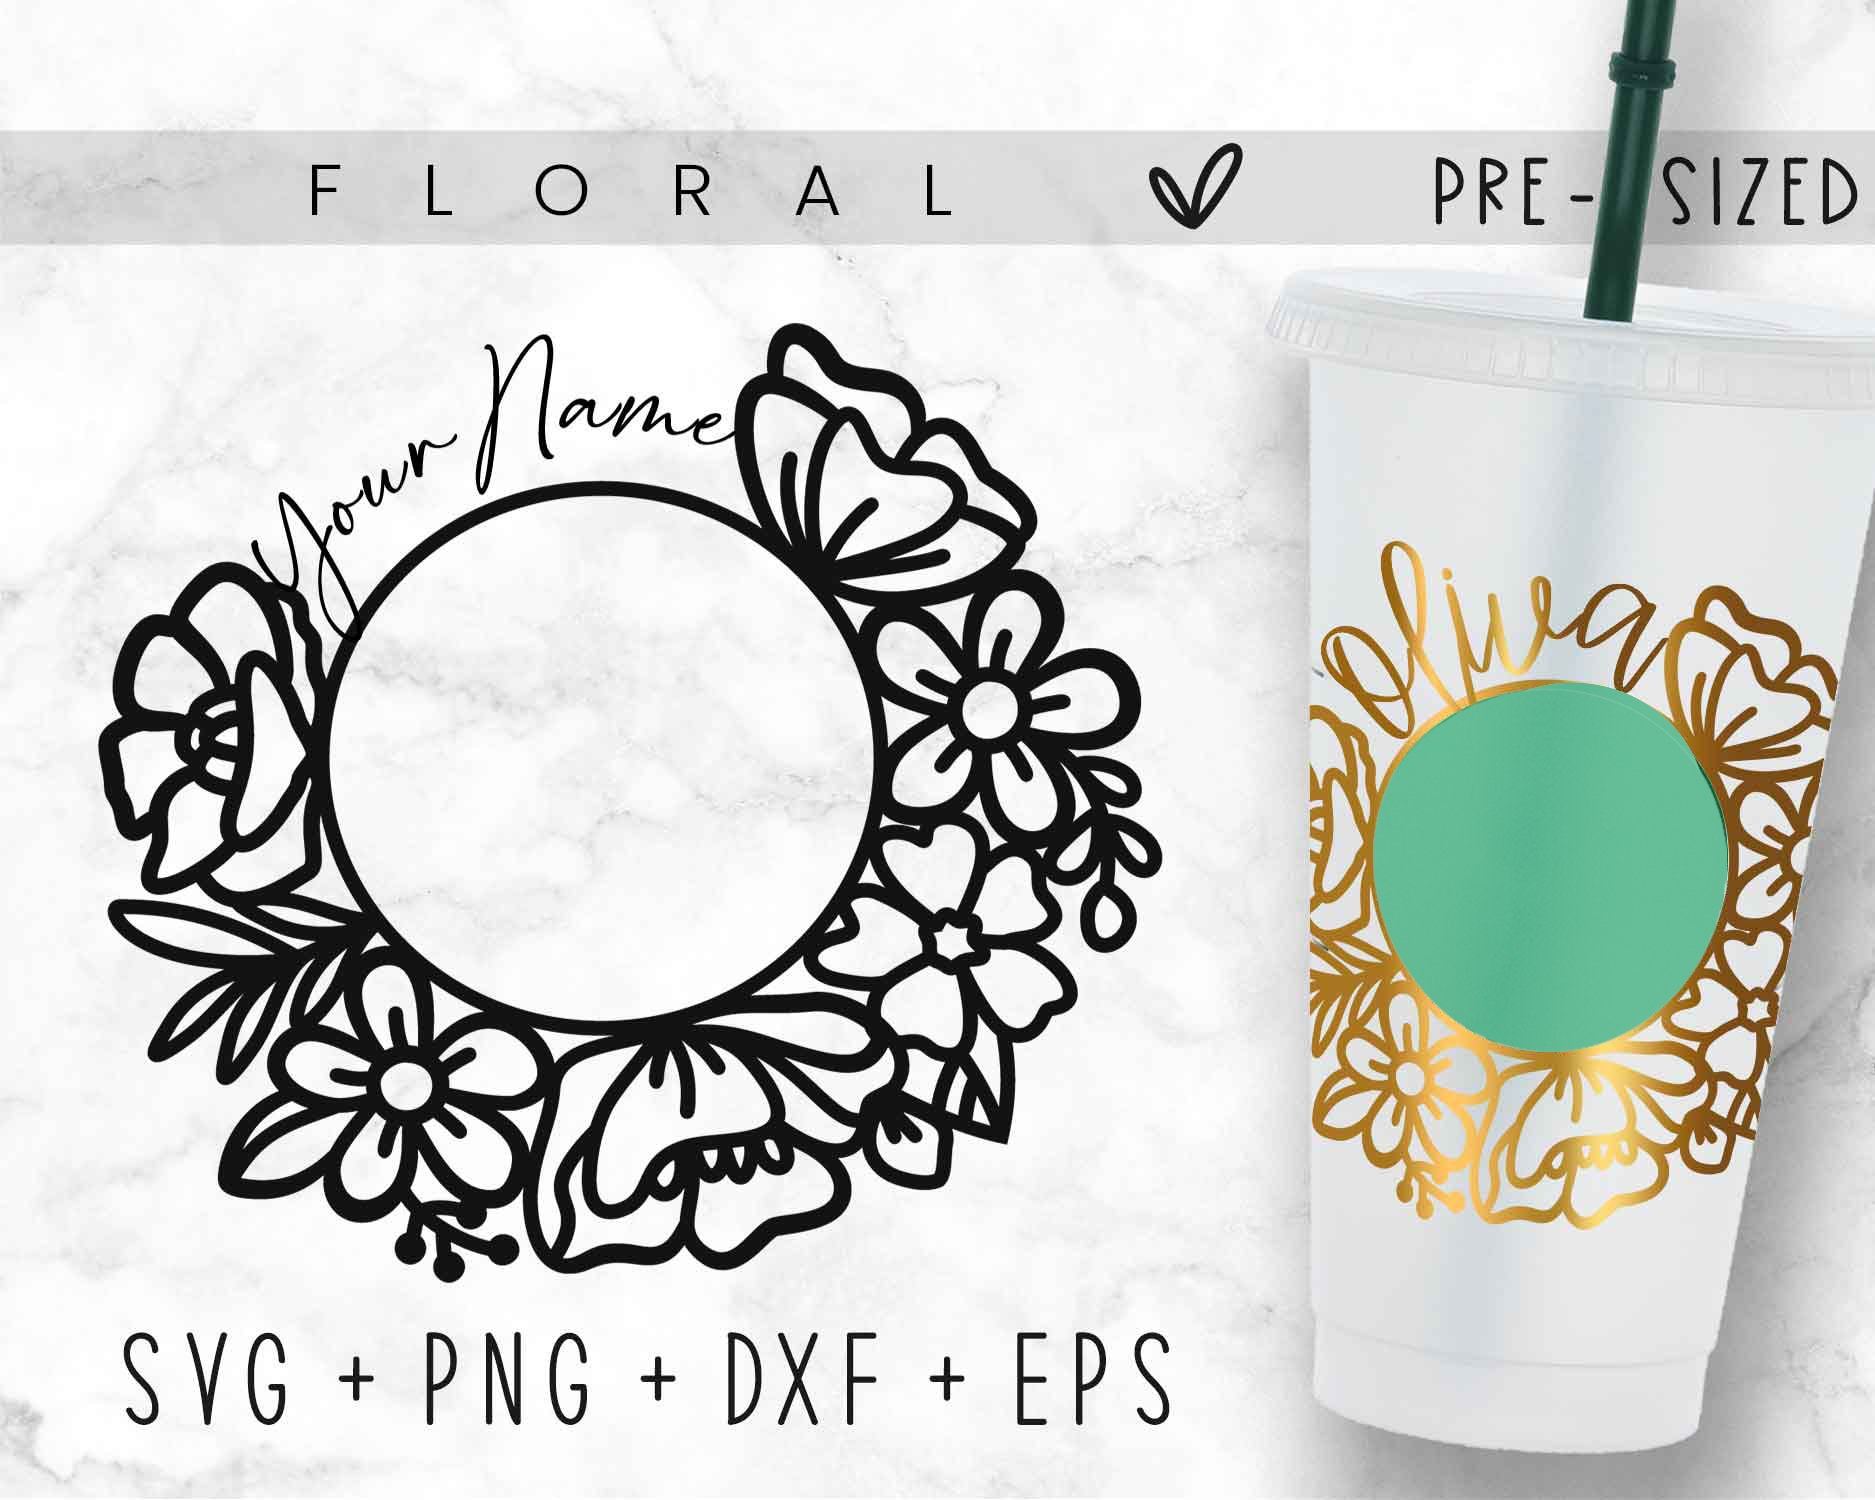 sandsandserifs Personalized Starbucks Cold Cups - Floral Design -  Personalized with Name in mul…